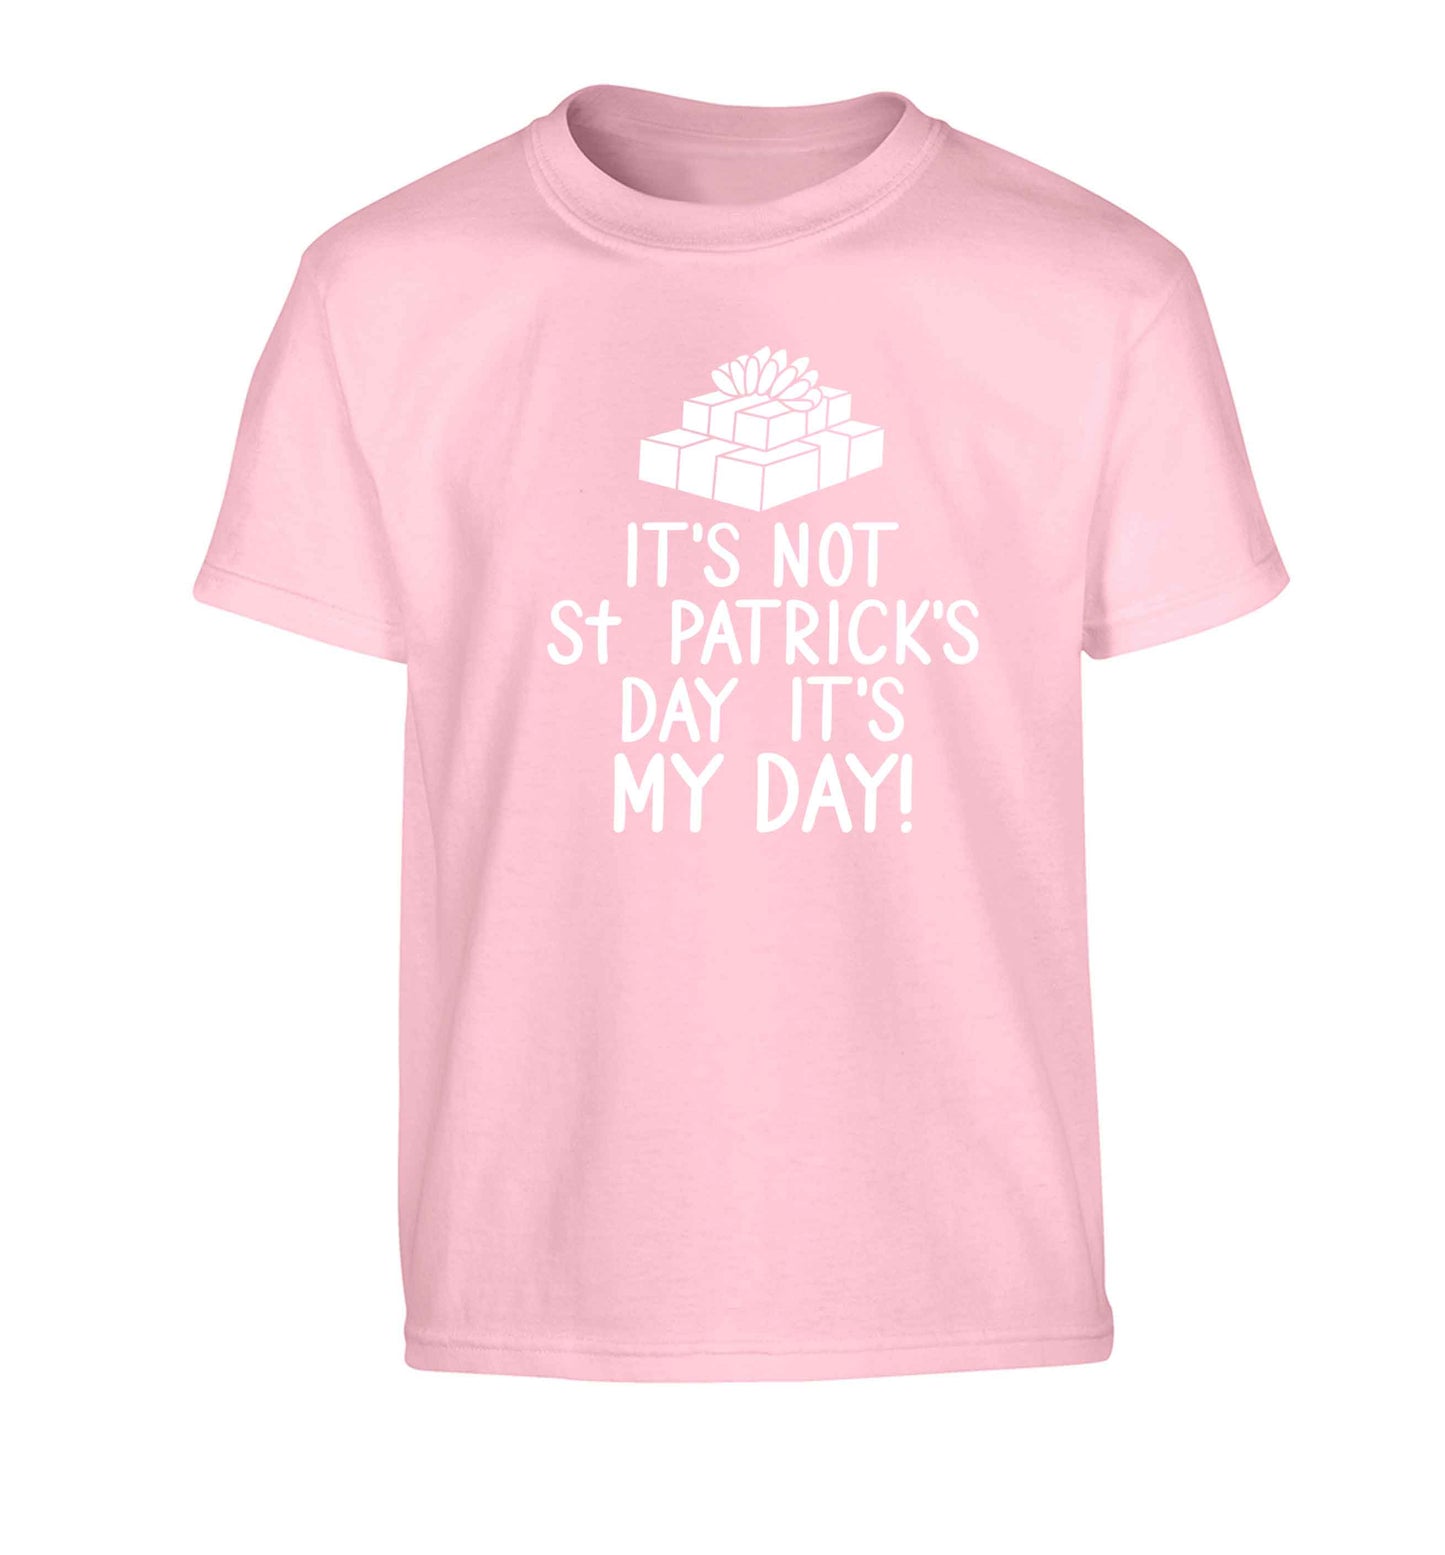 Funny gifts for your mum on mother's dayor her birthday! It's not St Patricks day it's my day Children's light pink Tshirt 12-13 Years